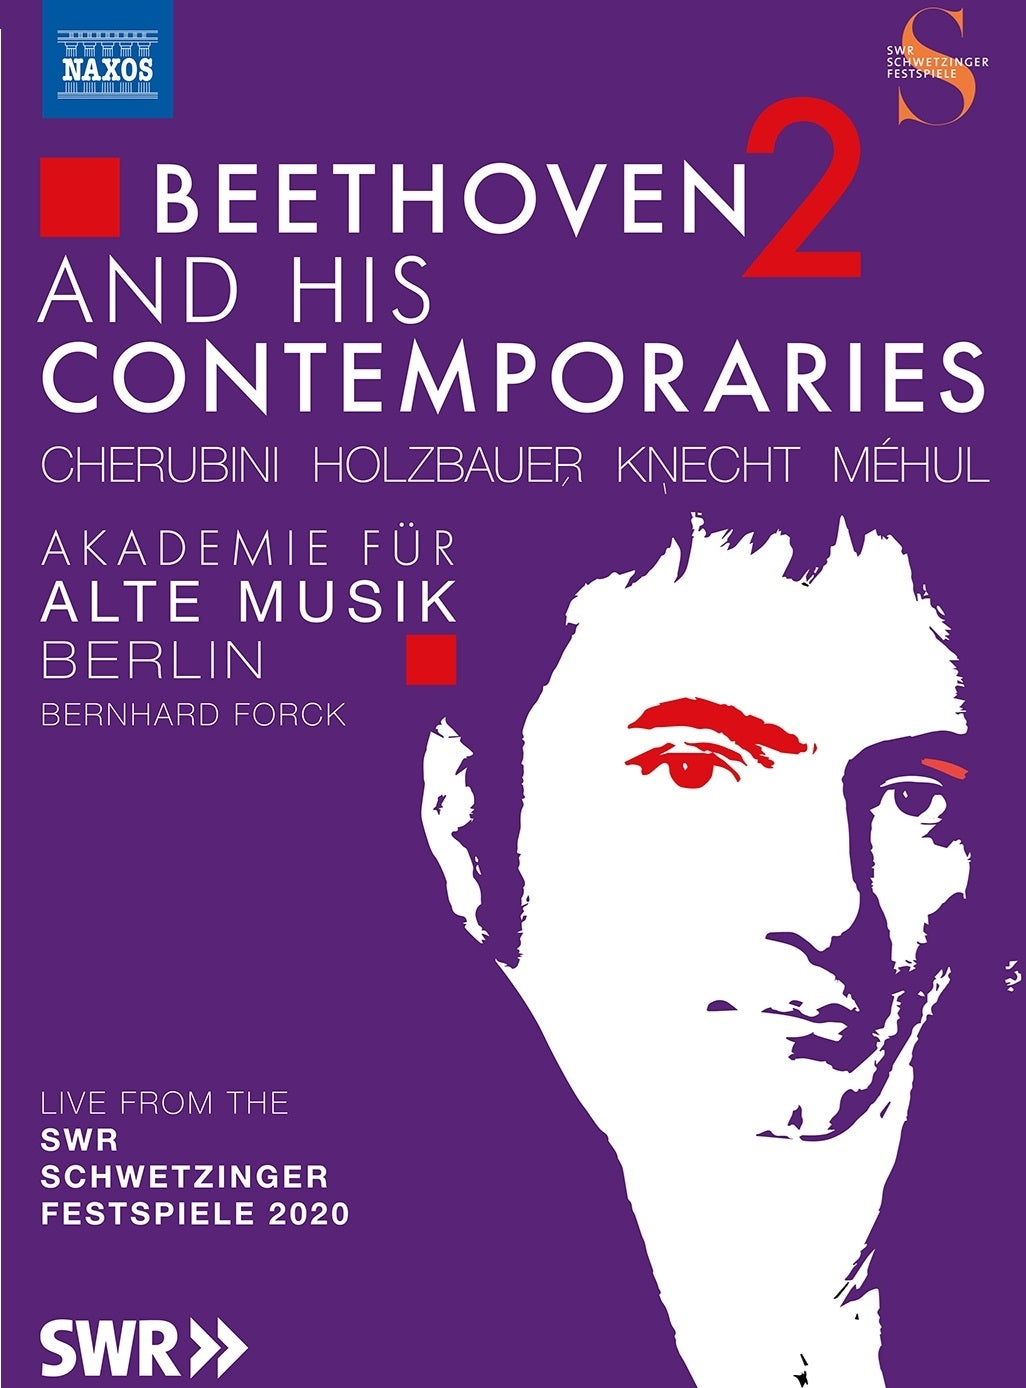 Beethoven and His Contemporaries, Vol. 2 / Forck, Akademie für Alte Musik Berlin [DVD]